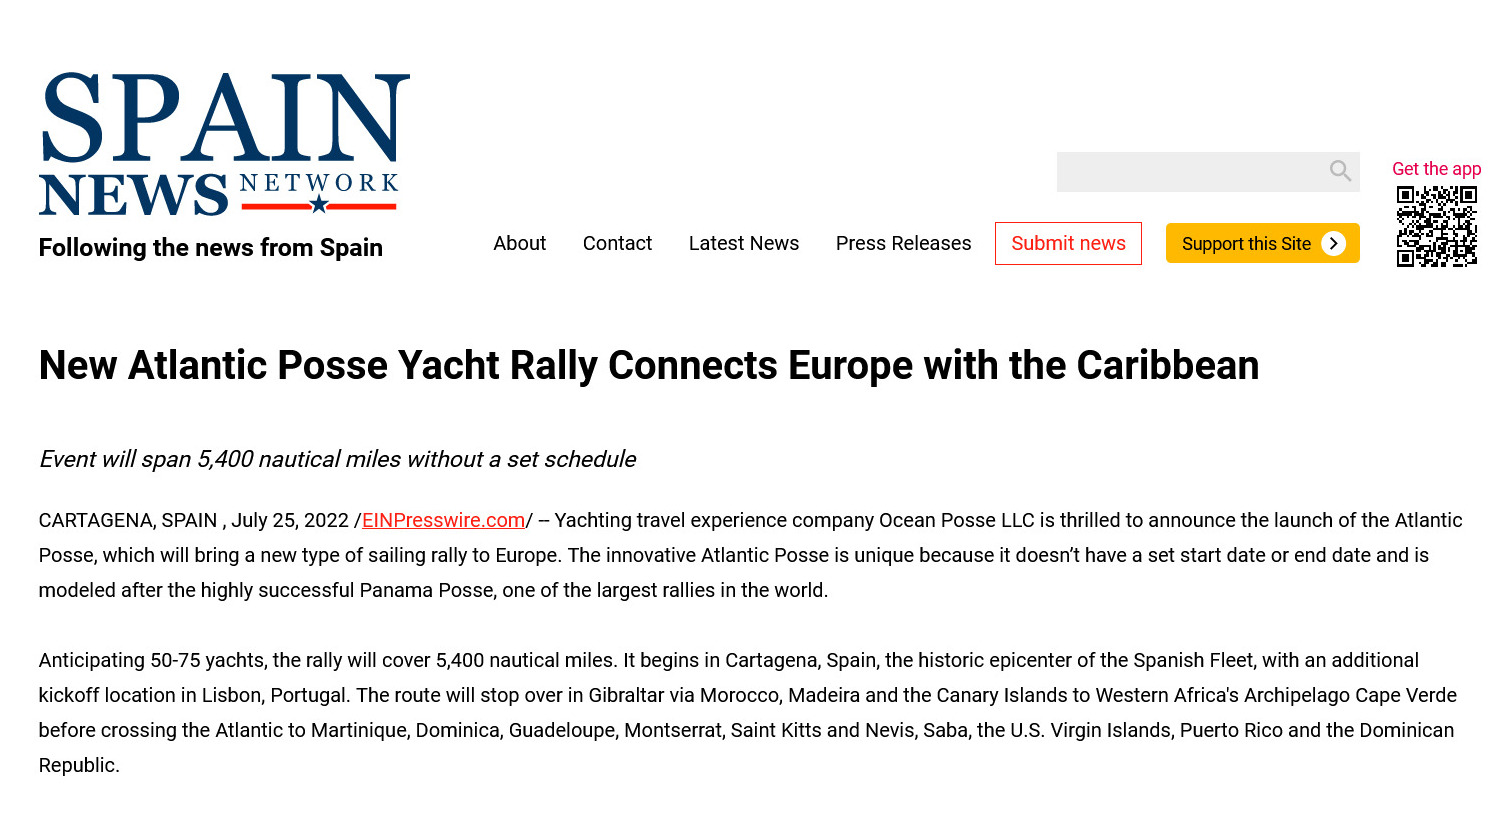 https://www.spainnewsnetwork.com/article/582846270-new-atlantic-posse-yacht-rally-connects-europe-with-the-caribbean